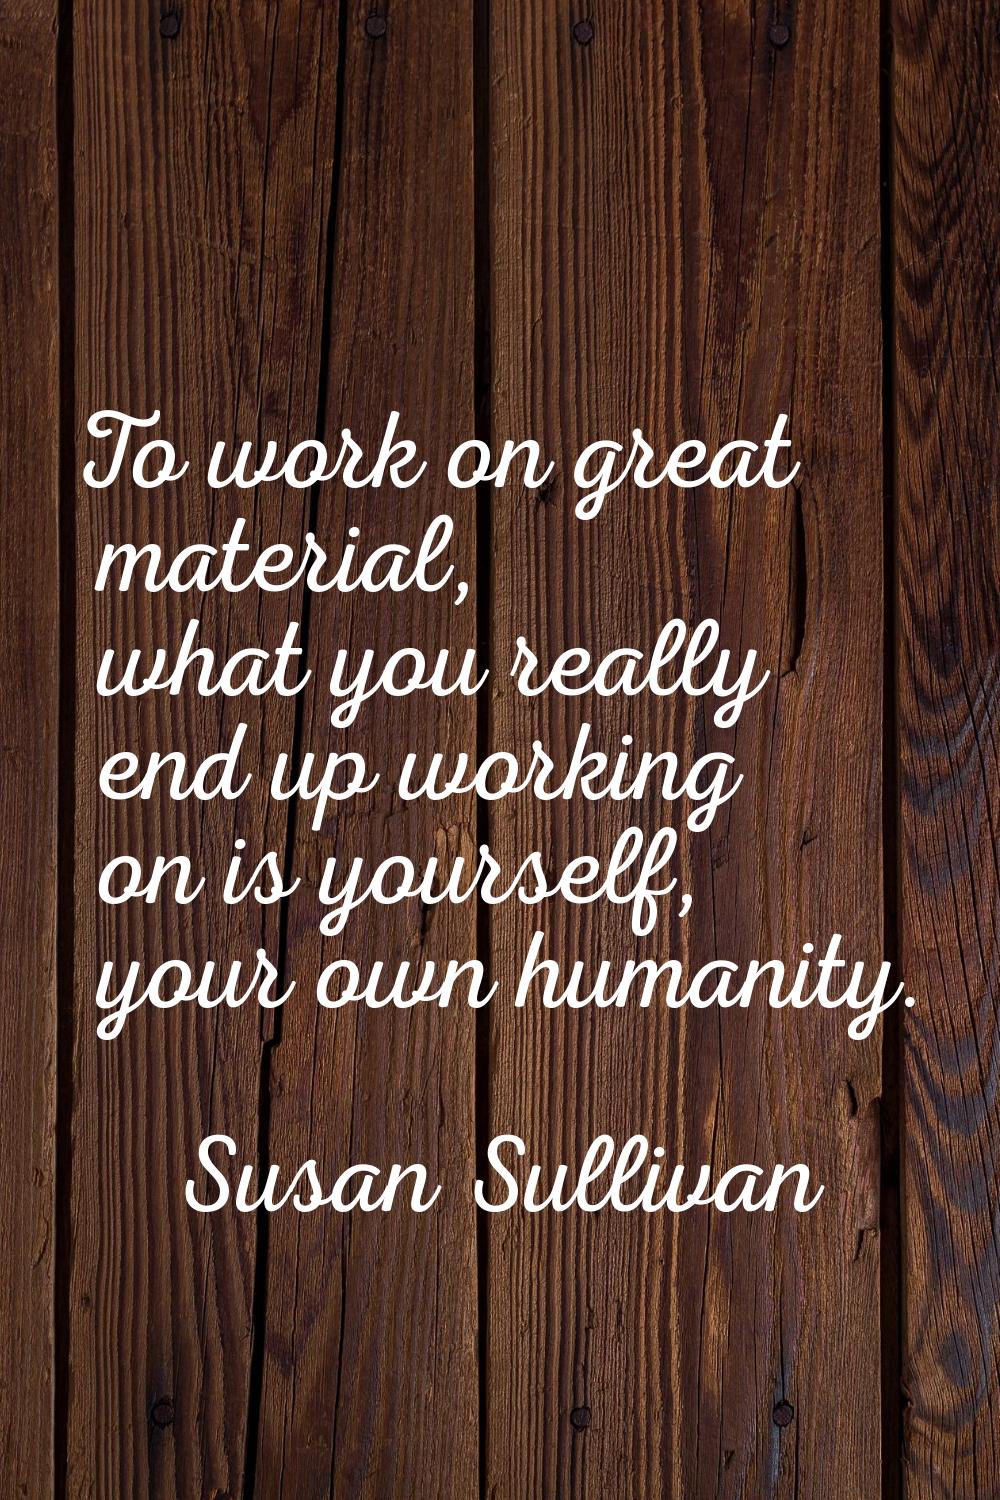 To work on great material, what you really end up working on is yourself, your own humanity.